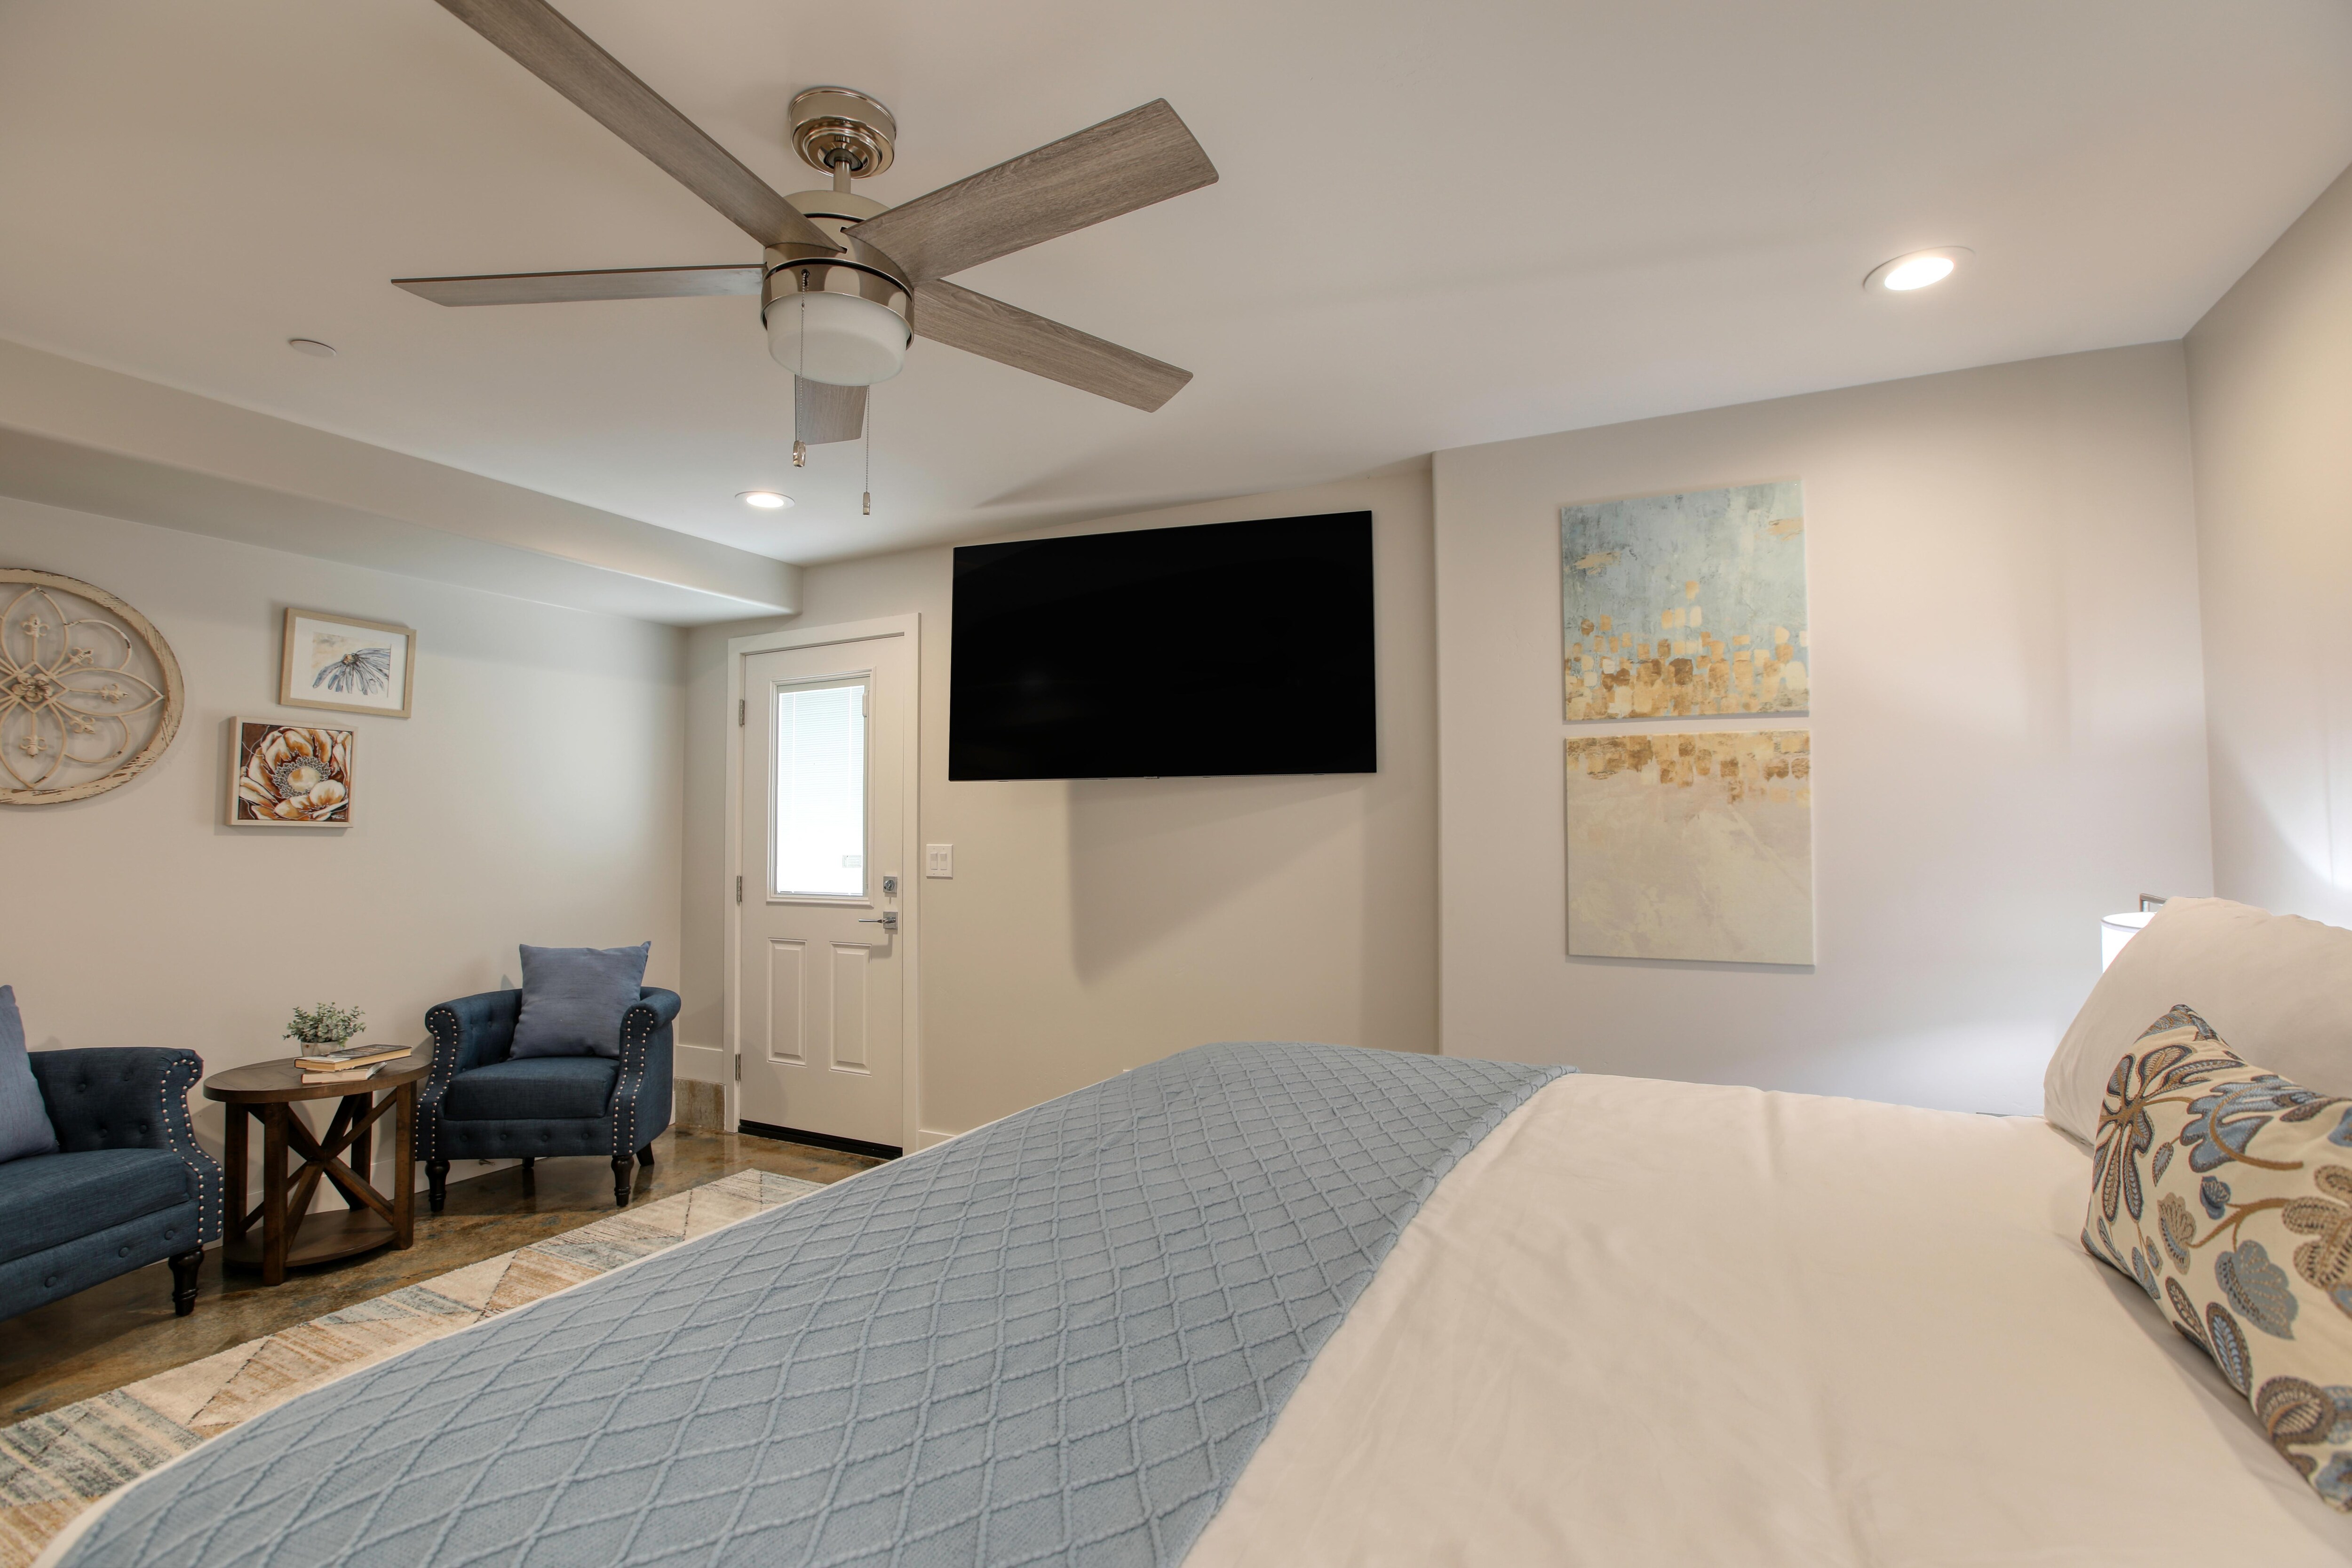 The third bedroom has a private entrance from Beach Colony Lane.